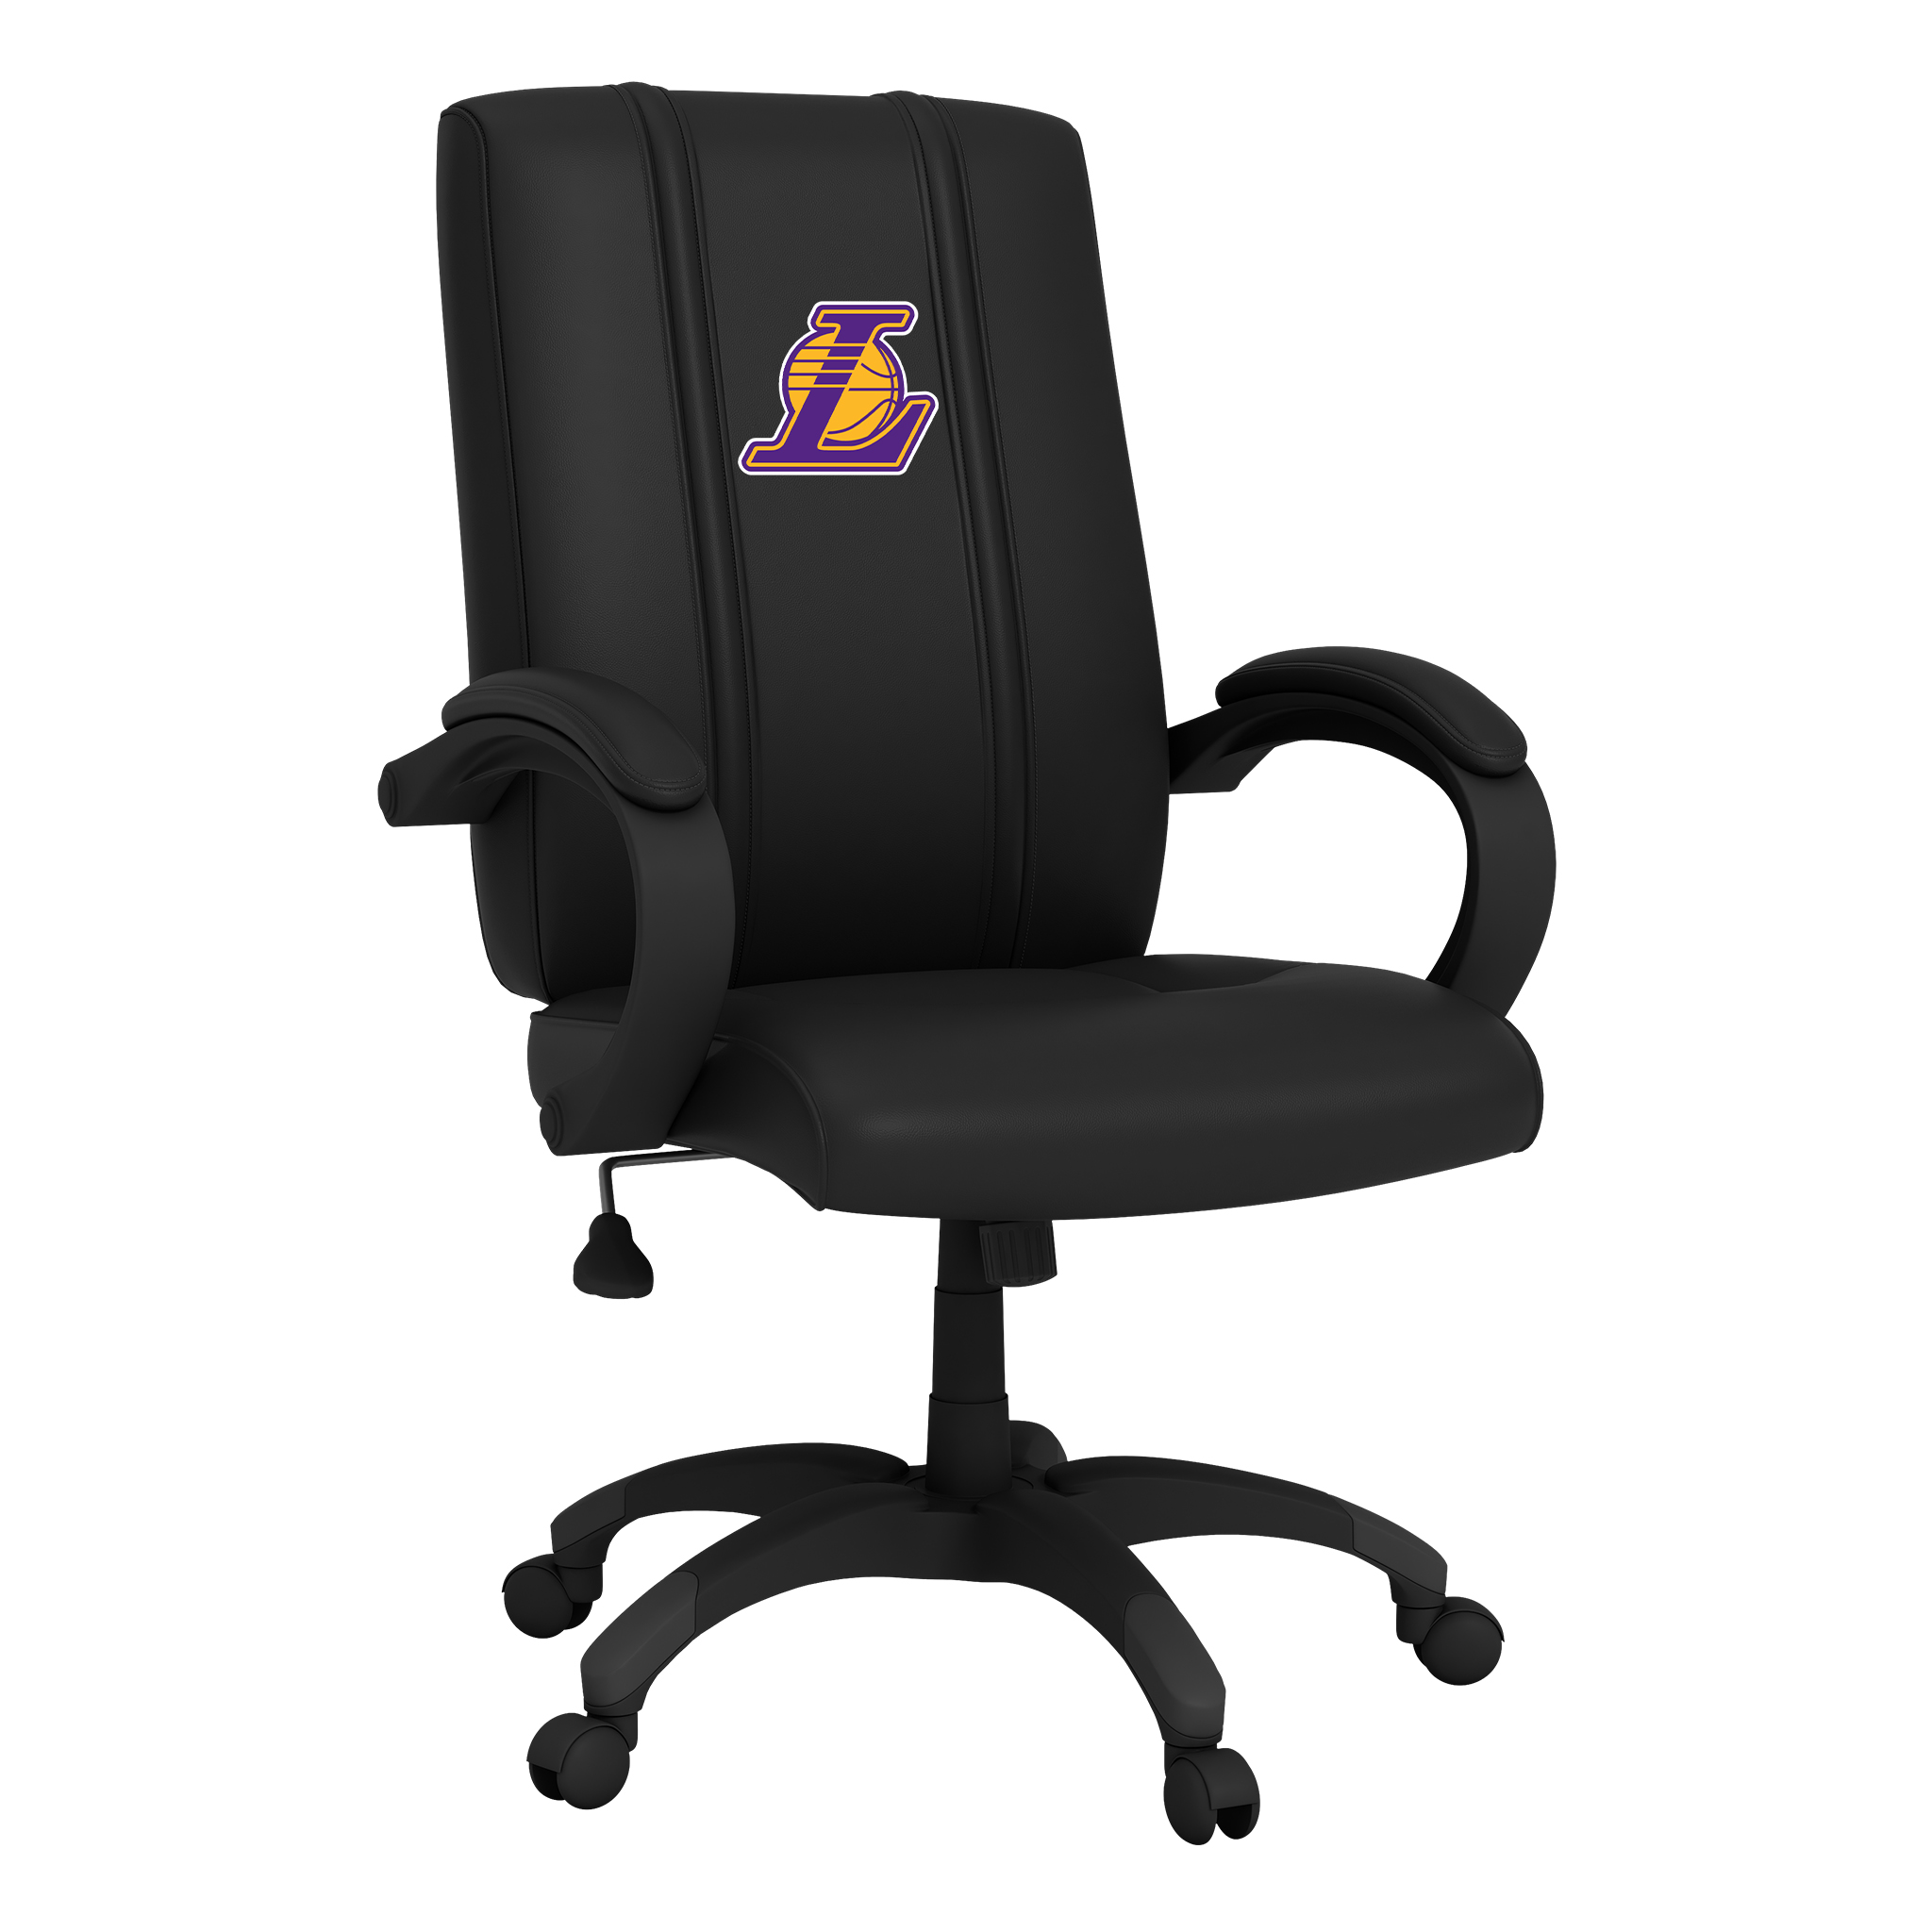 Los Angeles Lakers Office Chair 1000 with Los Angeles Lakers Secondary